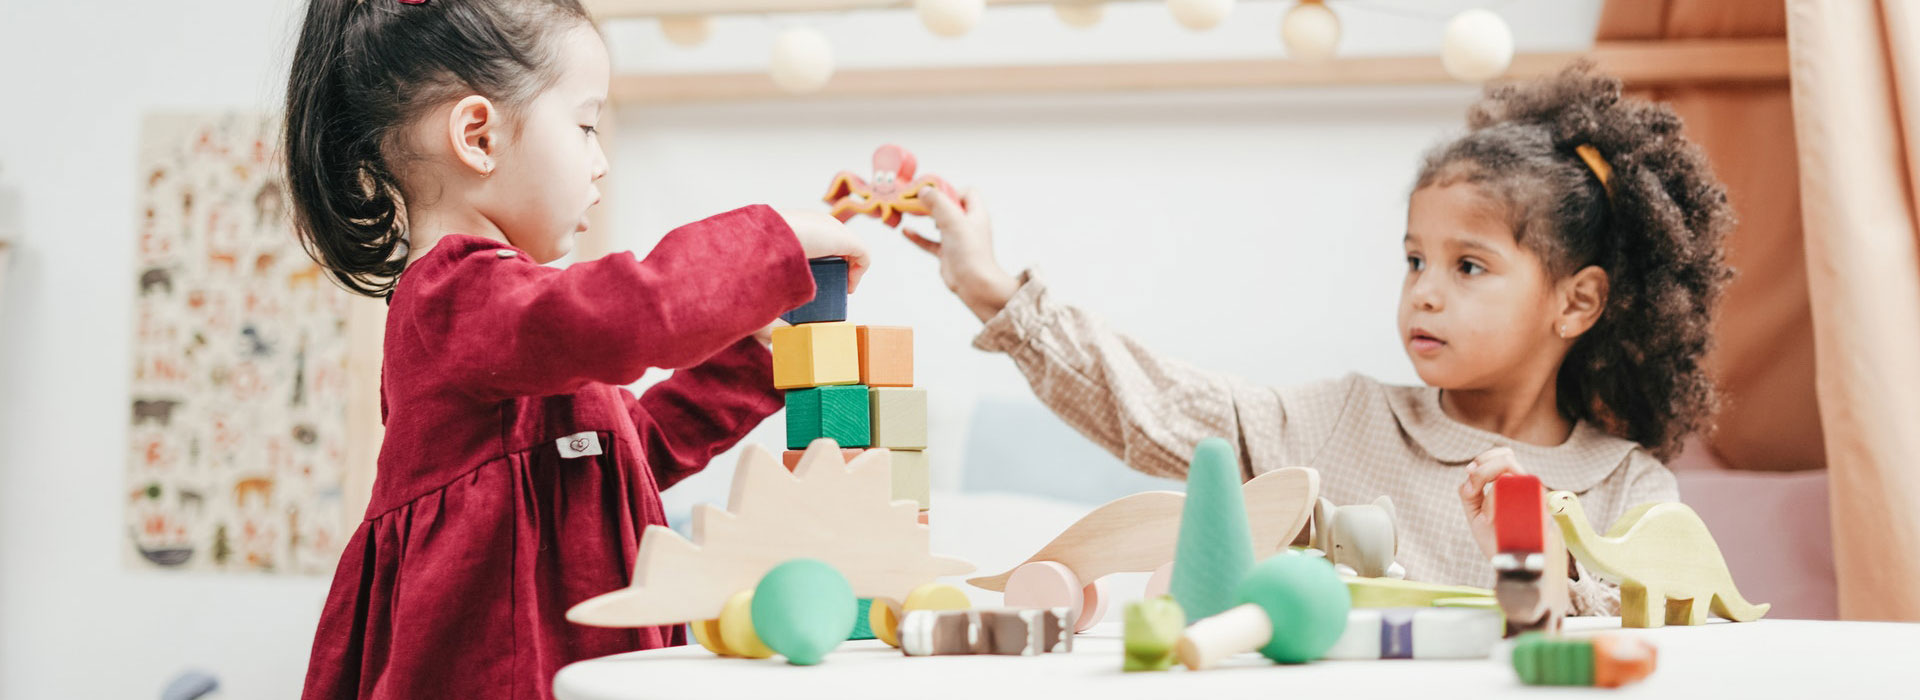 image of a children playing together at child care with blocks